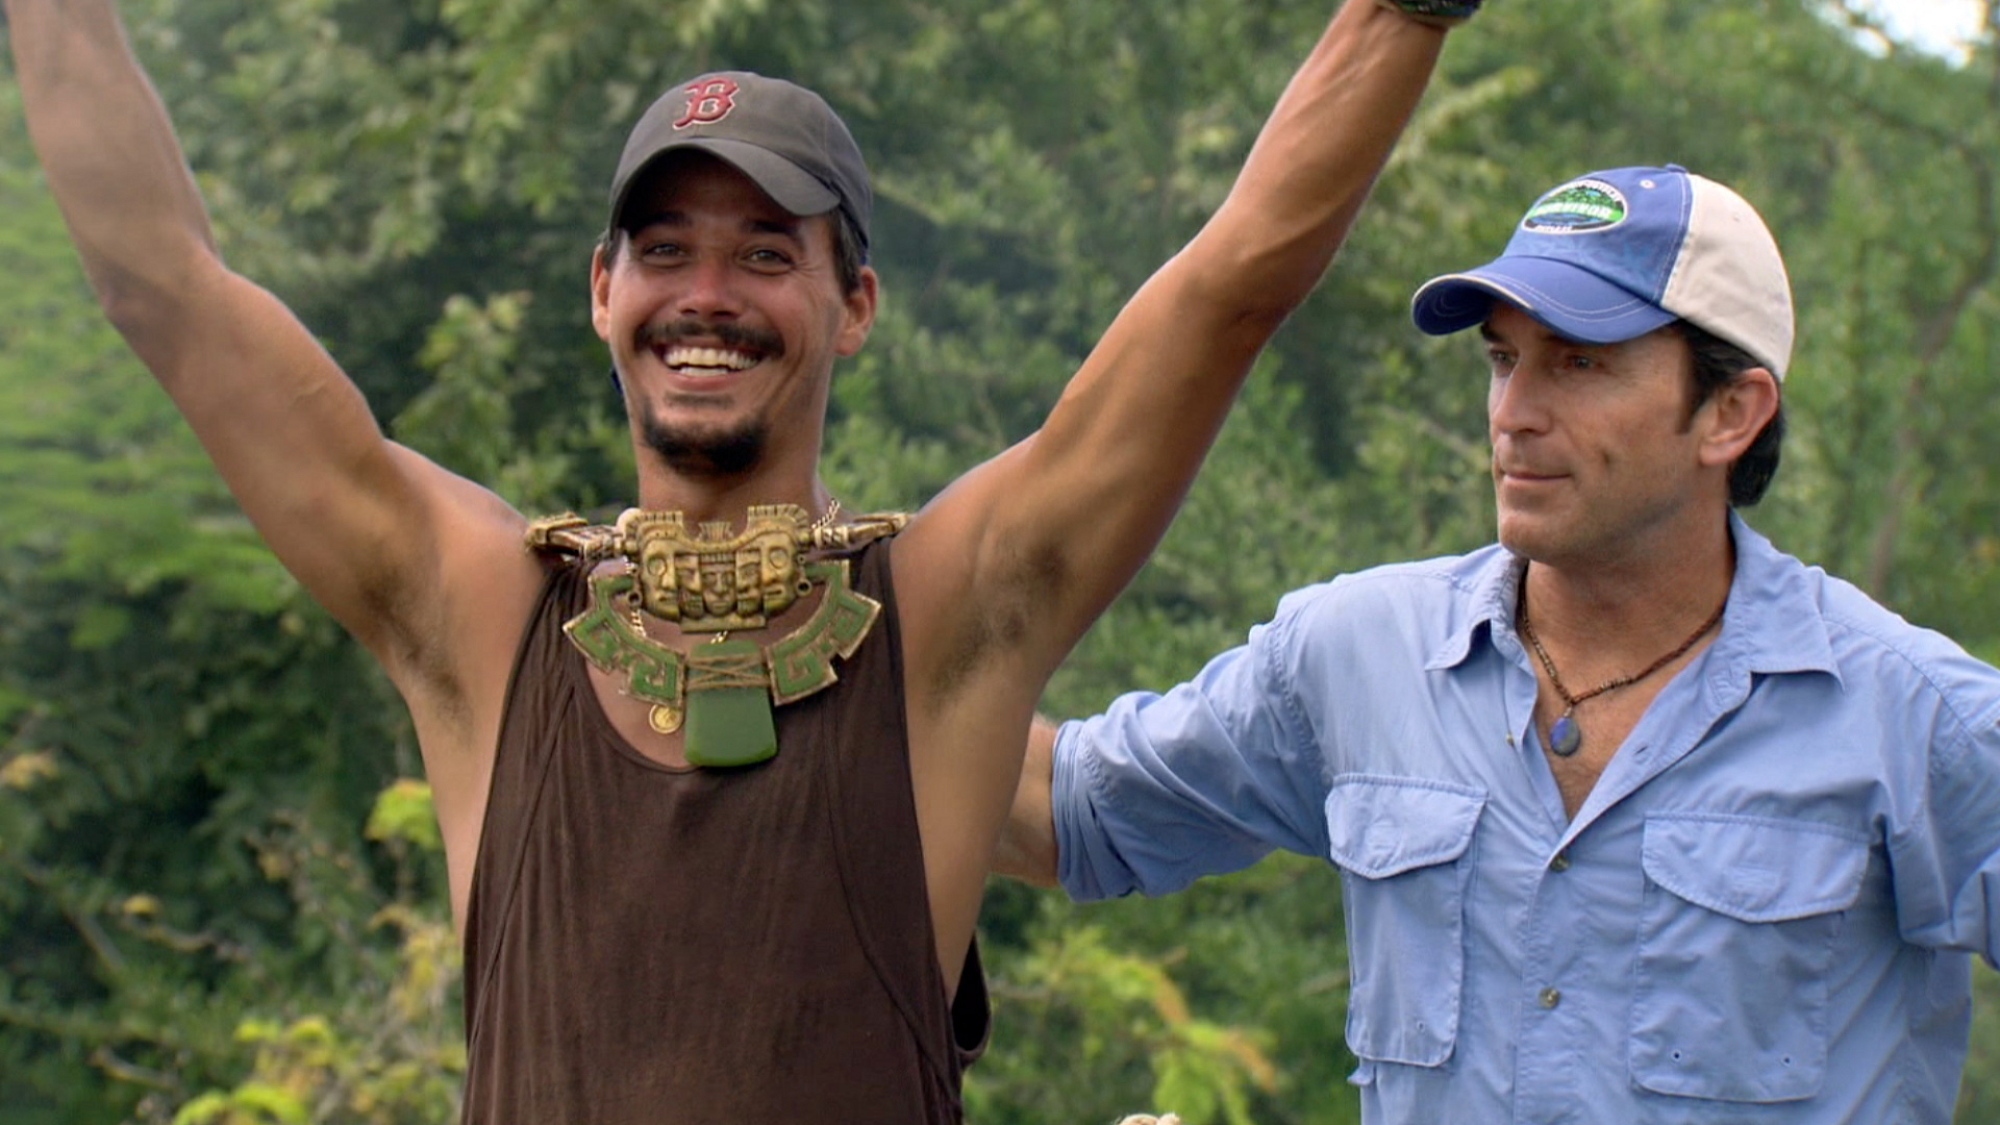 Jeff Probst and Rob Mariano in Survivor (2000)